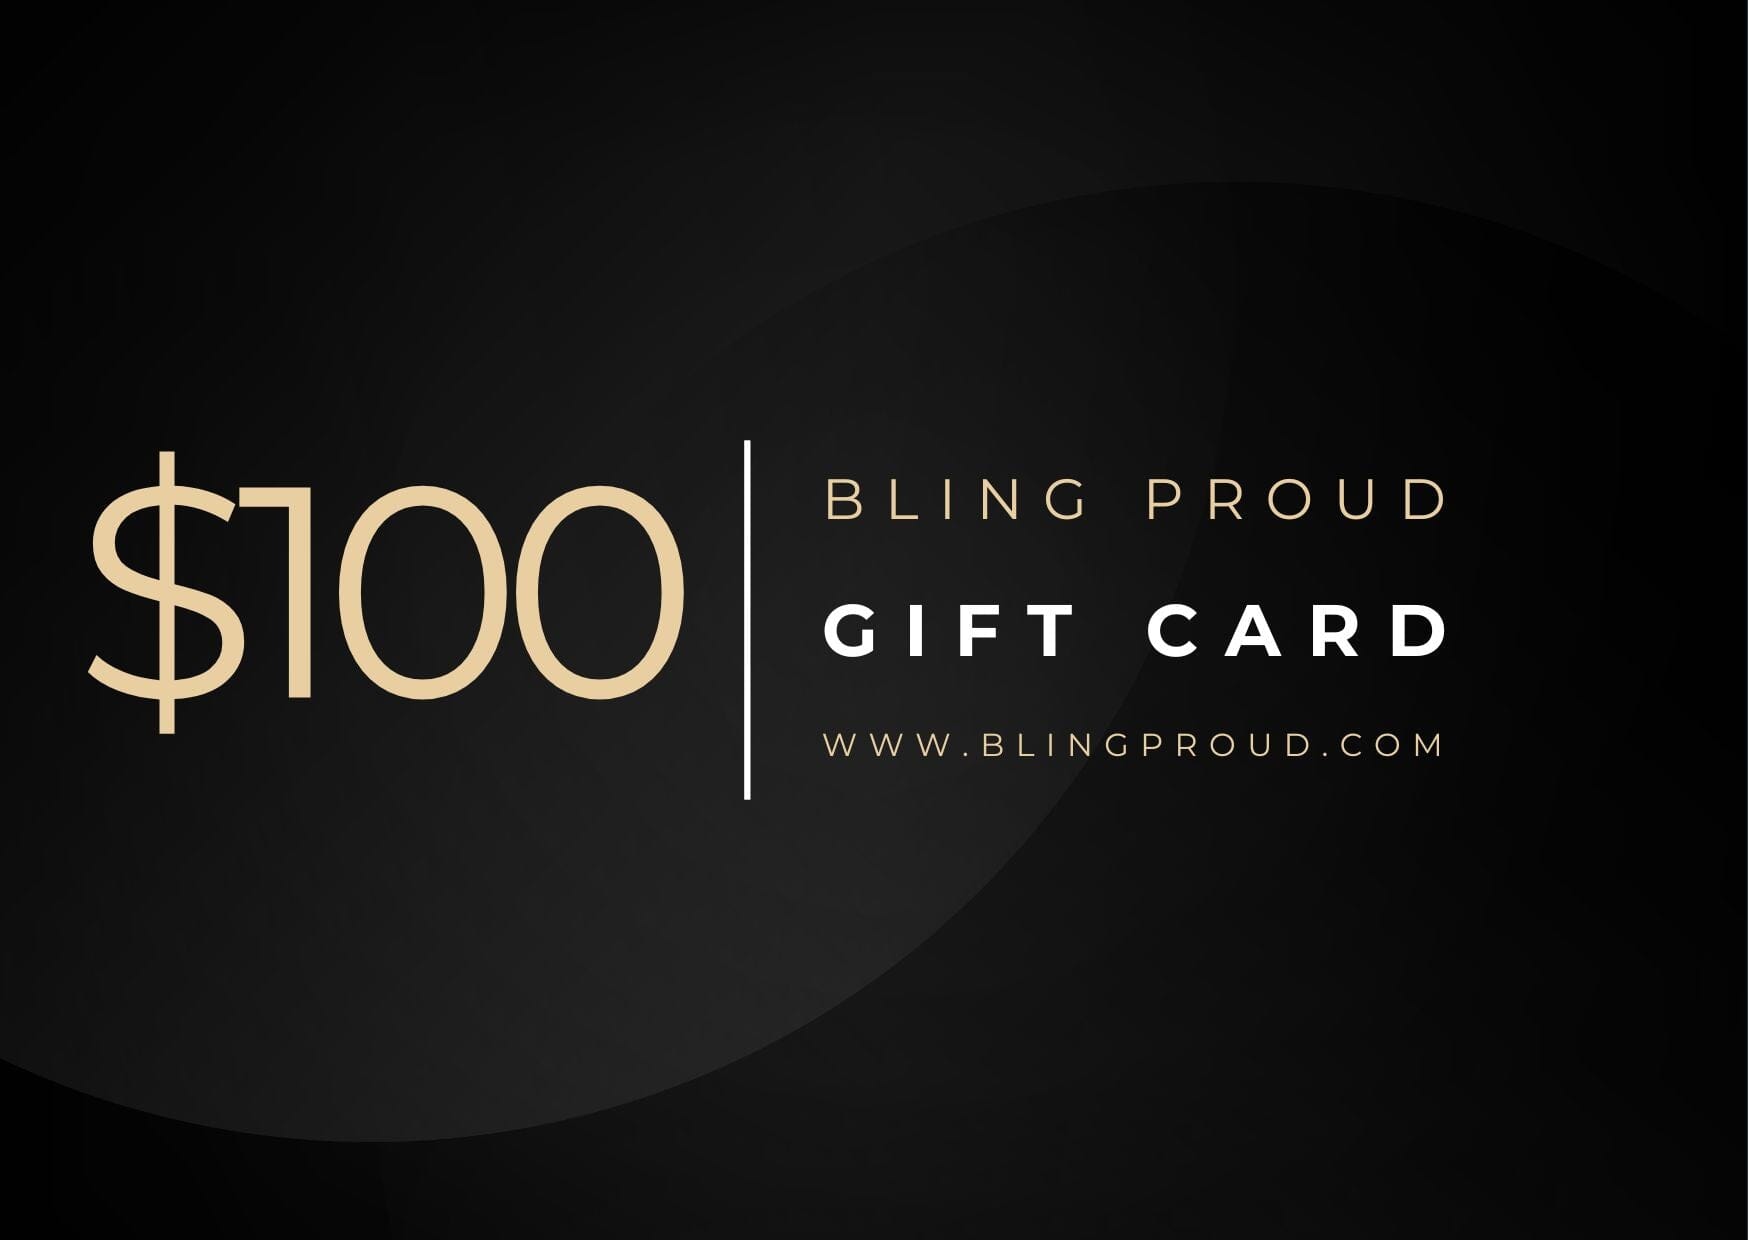 Bling Proud Gift Card $100.00 